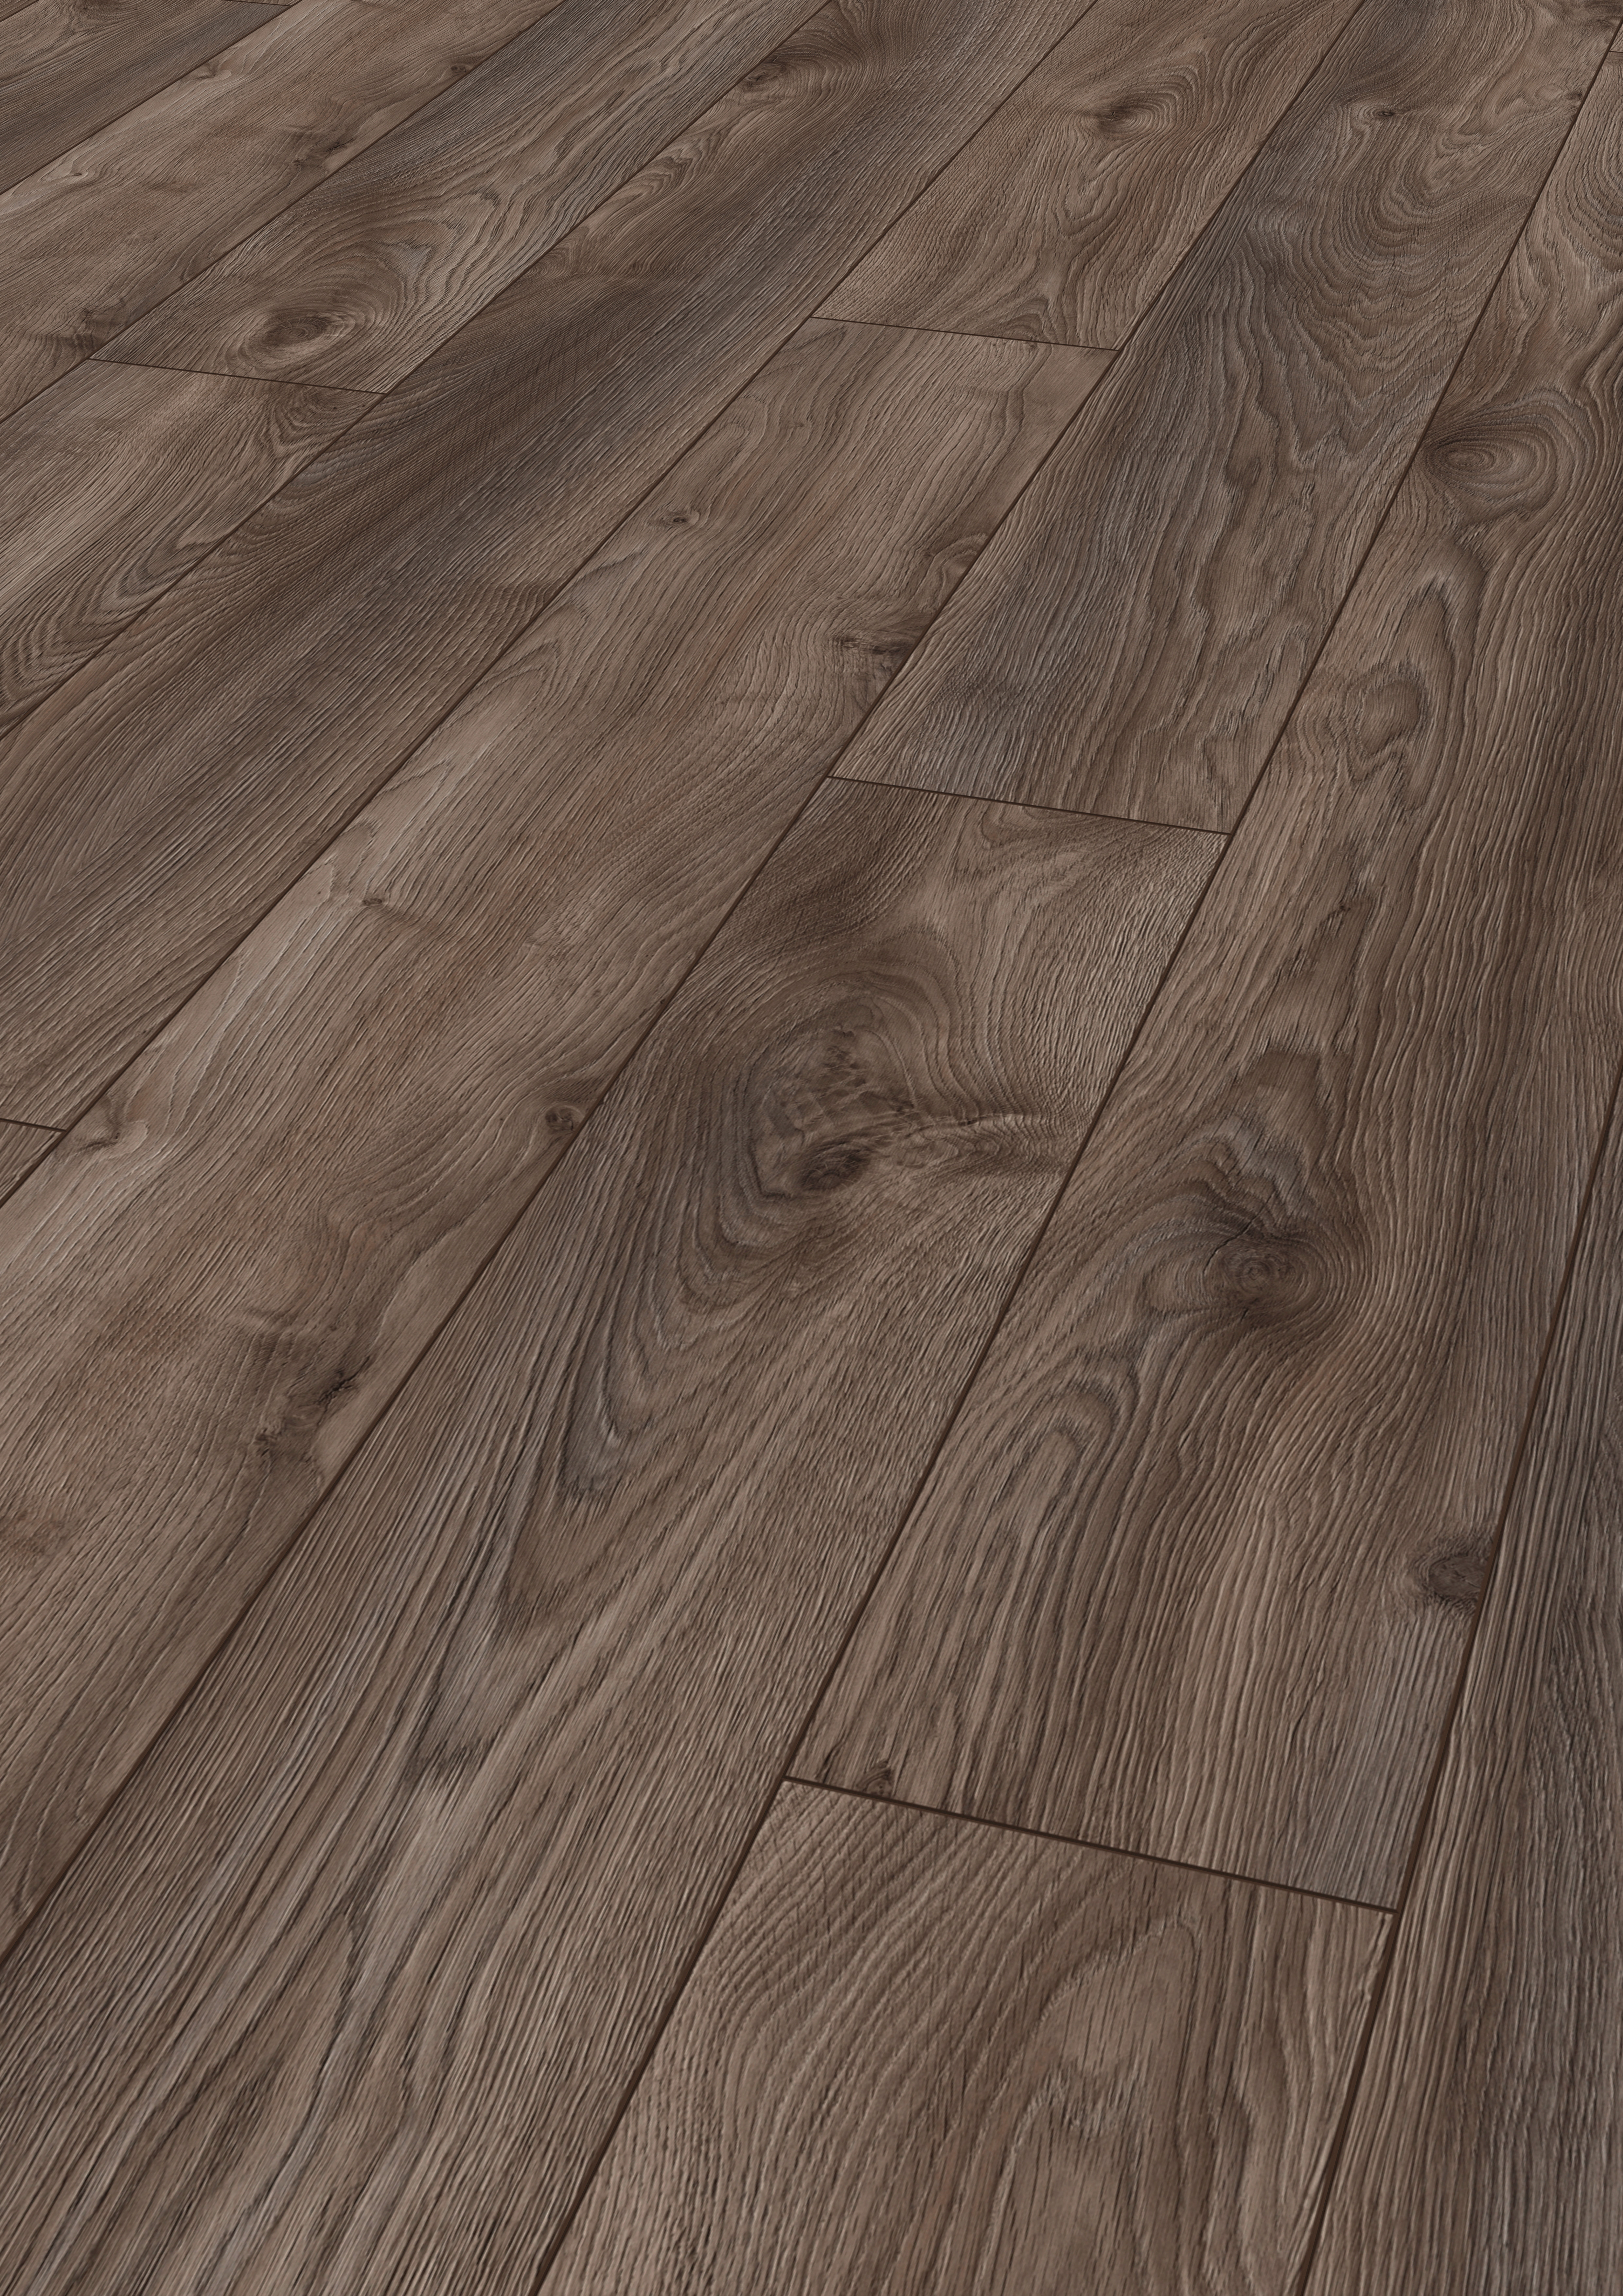 Bc Hardwood Floor Co Ltd Of Mammut Laminate Flooring In Country House Plank Style Kronotex Regarding Download Picture Amp